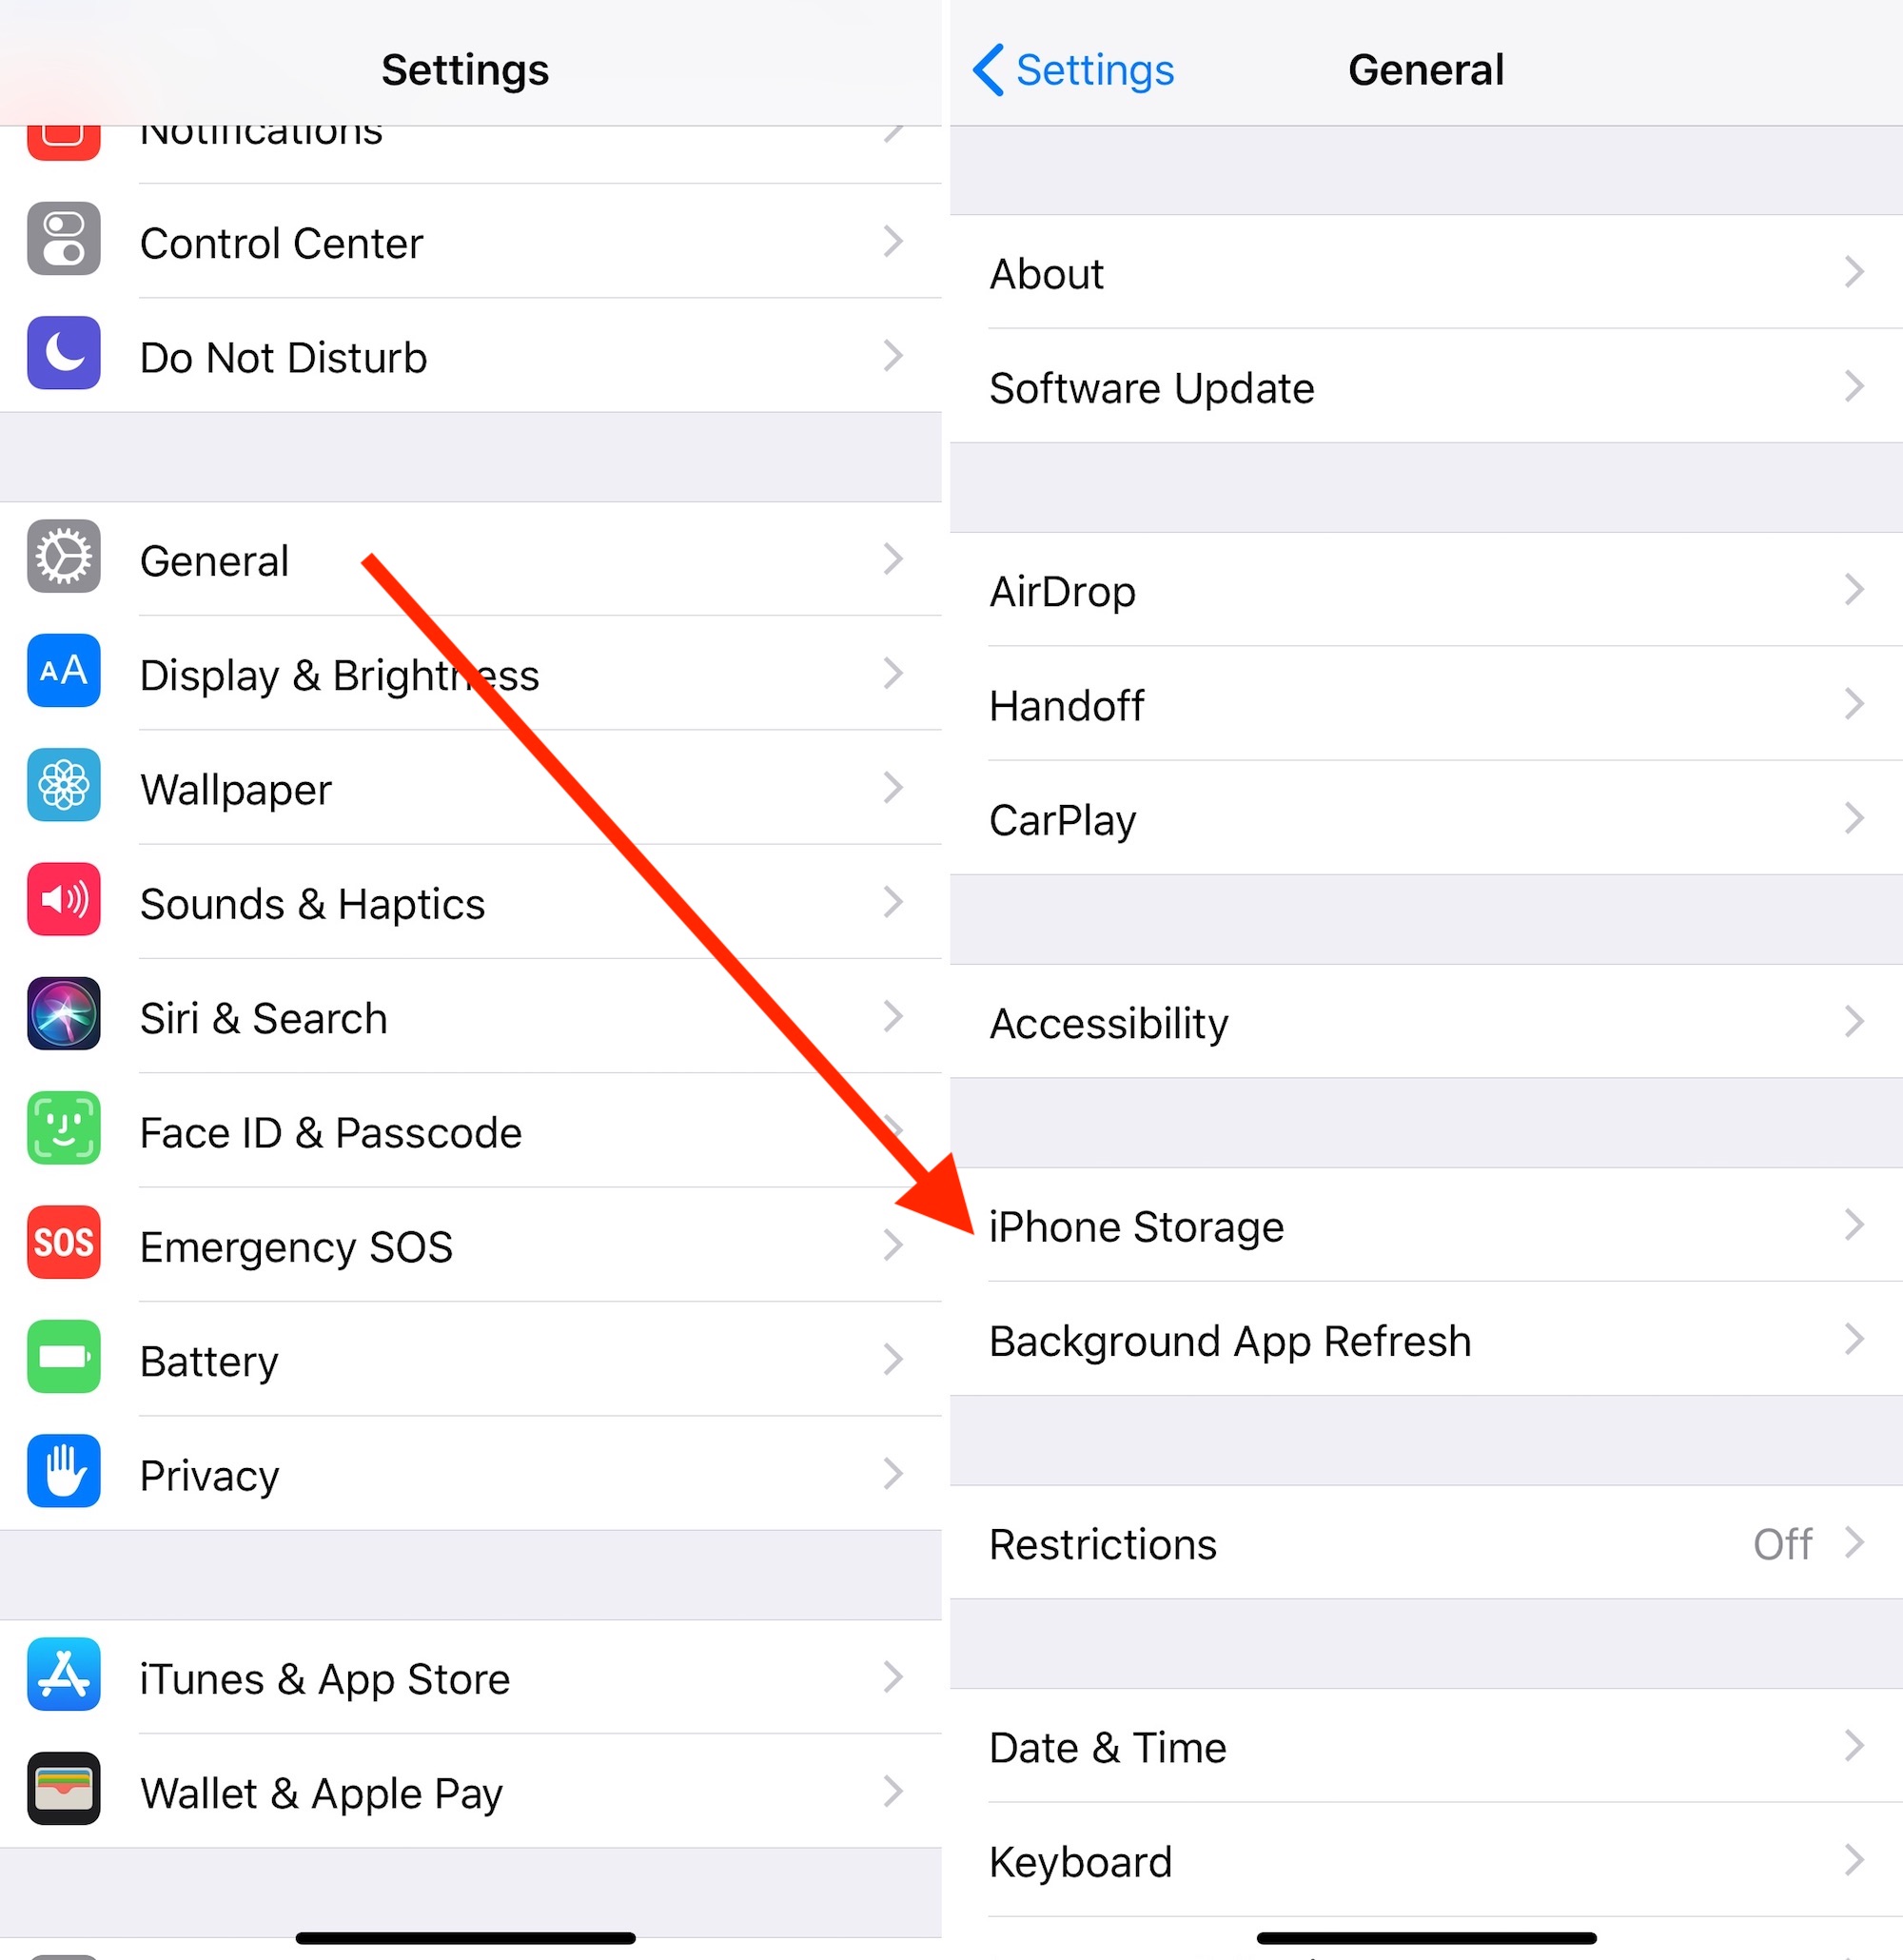 How to find out the last time you used an app on iPhone